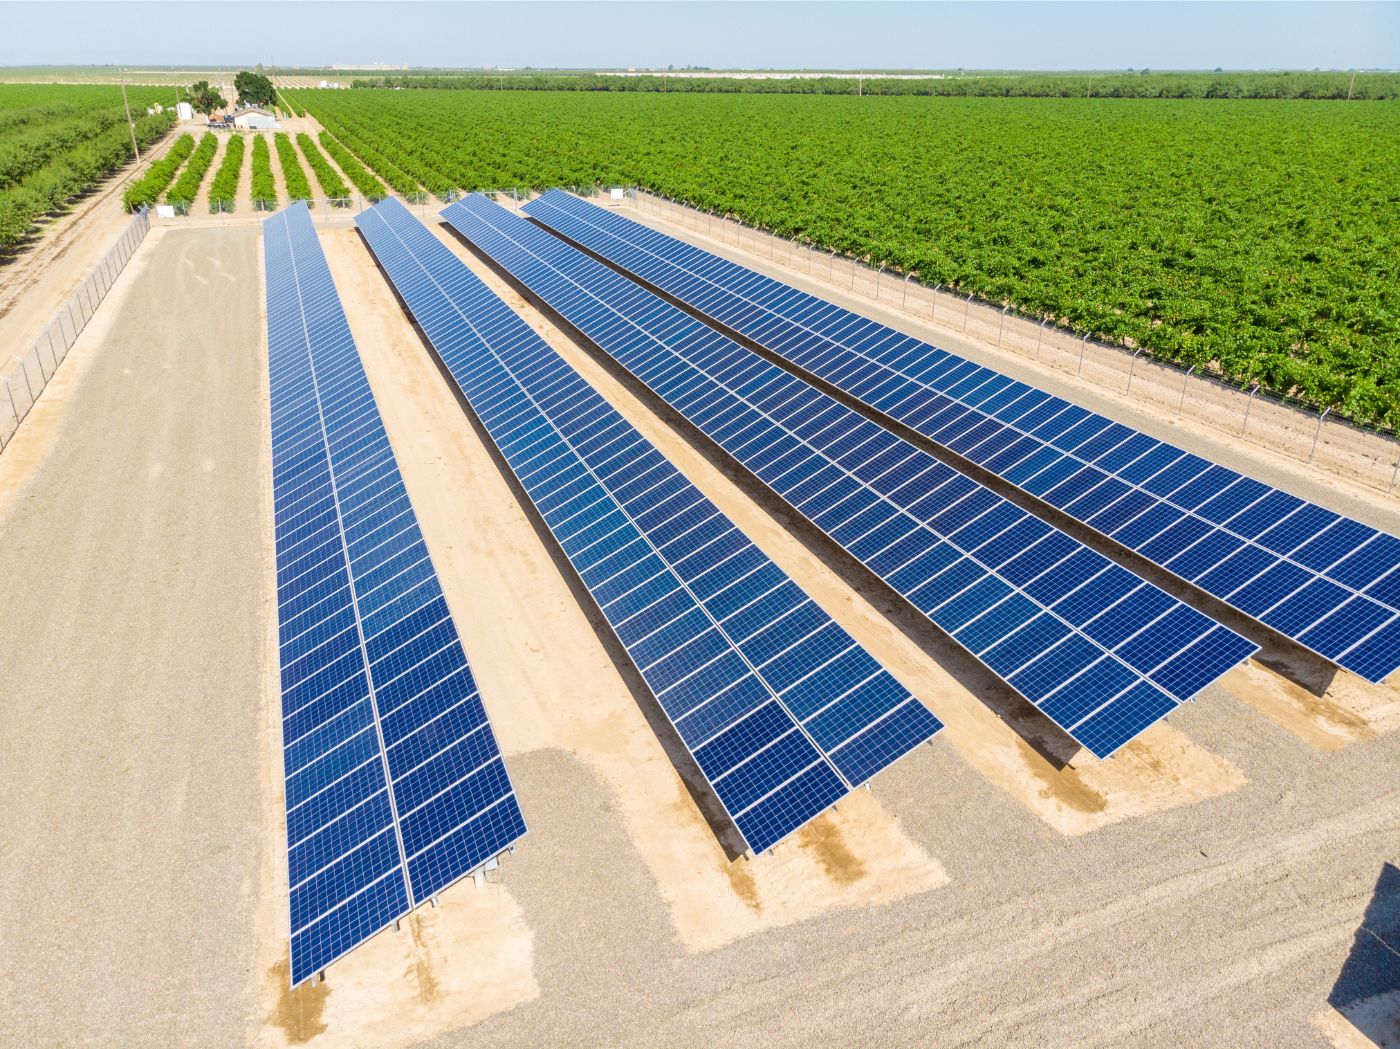 Aerial view of newly constructed solar panels surrounded by crop trees and grape vines against a blue sky.